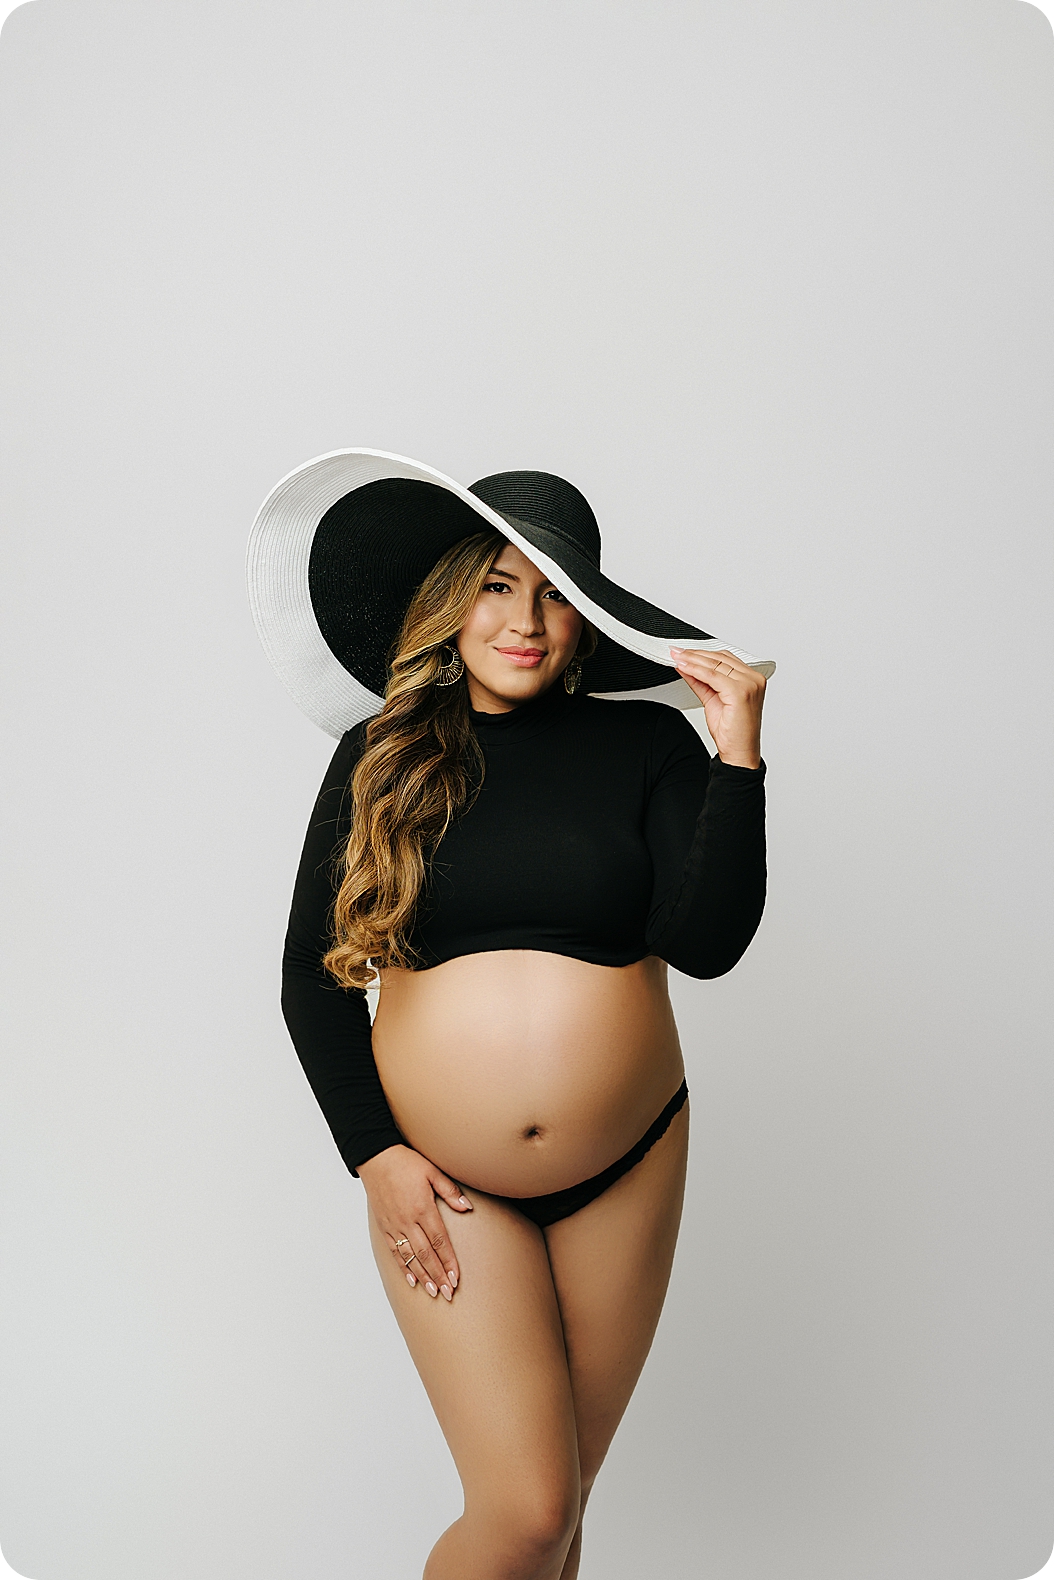 woman stands in black top with floppy hat during fashion inspired maternity session